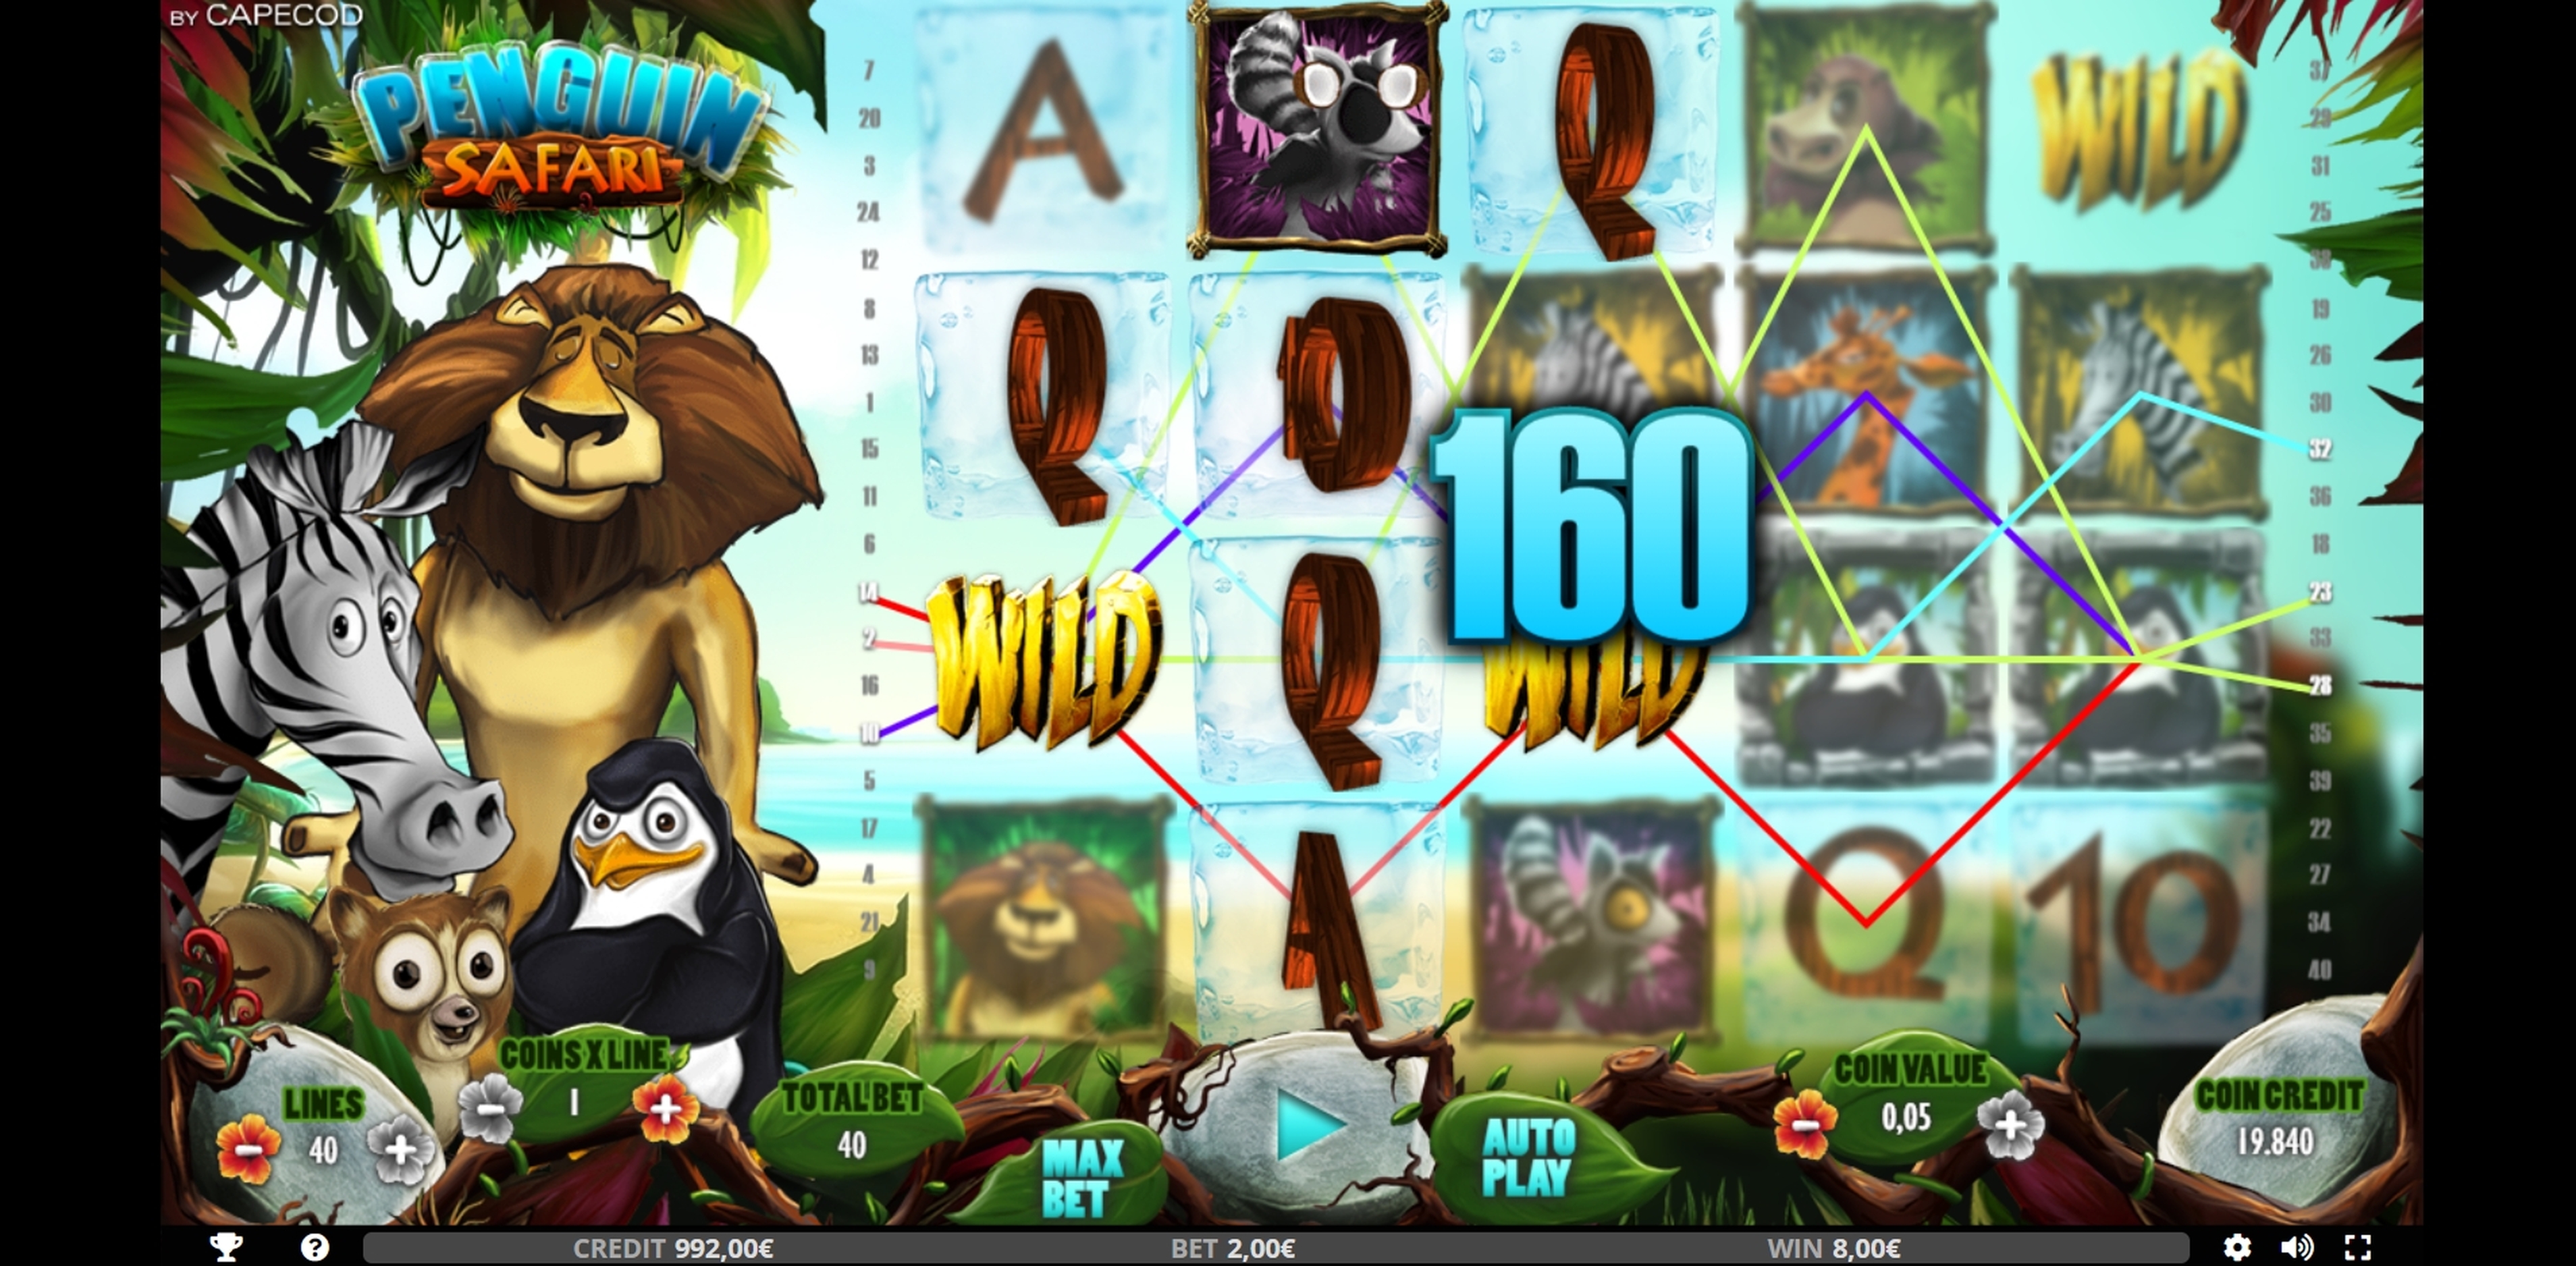 Win Money in Penguin Safari Free Slot Game by Capecod Gaming